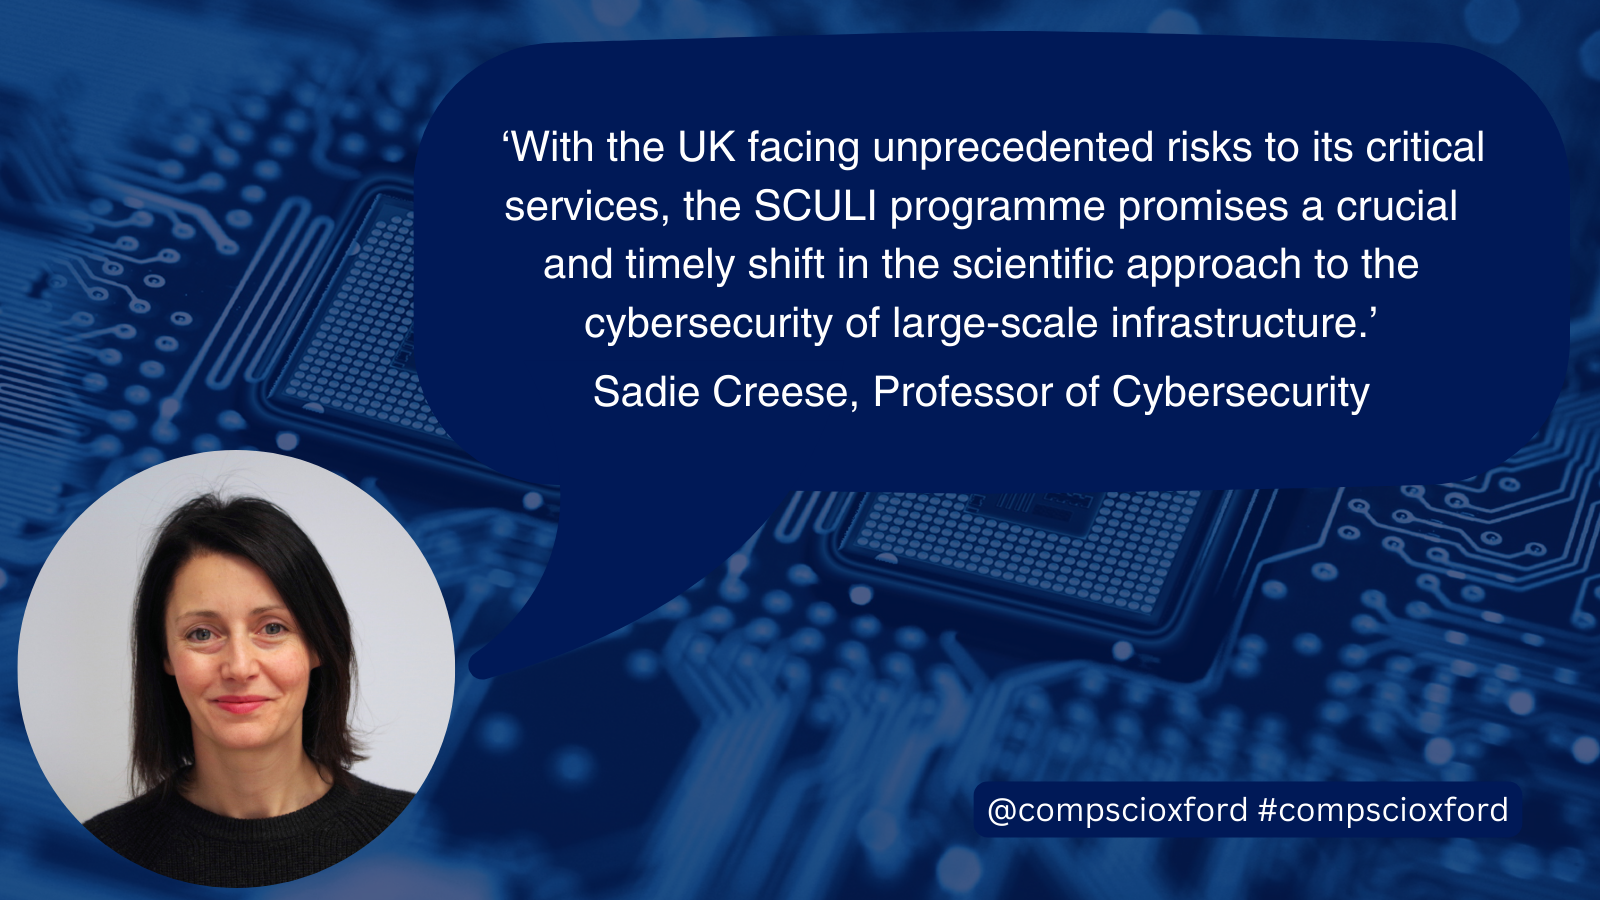 A blue image of a computer board with a dark blue speech bubble over it with text reading &ldquo;&lsquo;With the UK facing unprecedented risks to its critical services, the SCULI programme promises a crucial and timely shift in the scientific approach to the cybersecurity of large-scale infrastructure.&rsquo; Sadie Creese, Professor of Cybersecurity&rdquo; and a smaller blue box with text reading @compscioxford #compscioxford. On the bottom left of the image, there is a circular photograph of Professor Sadie Creese.
